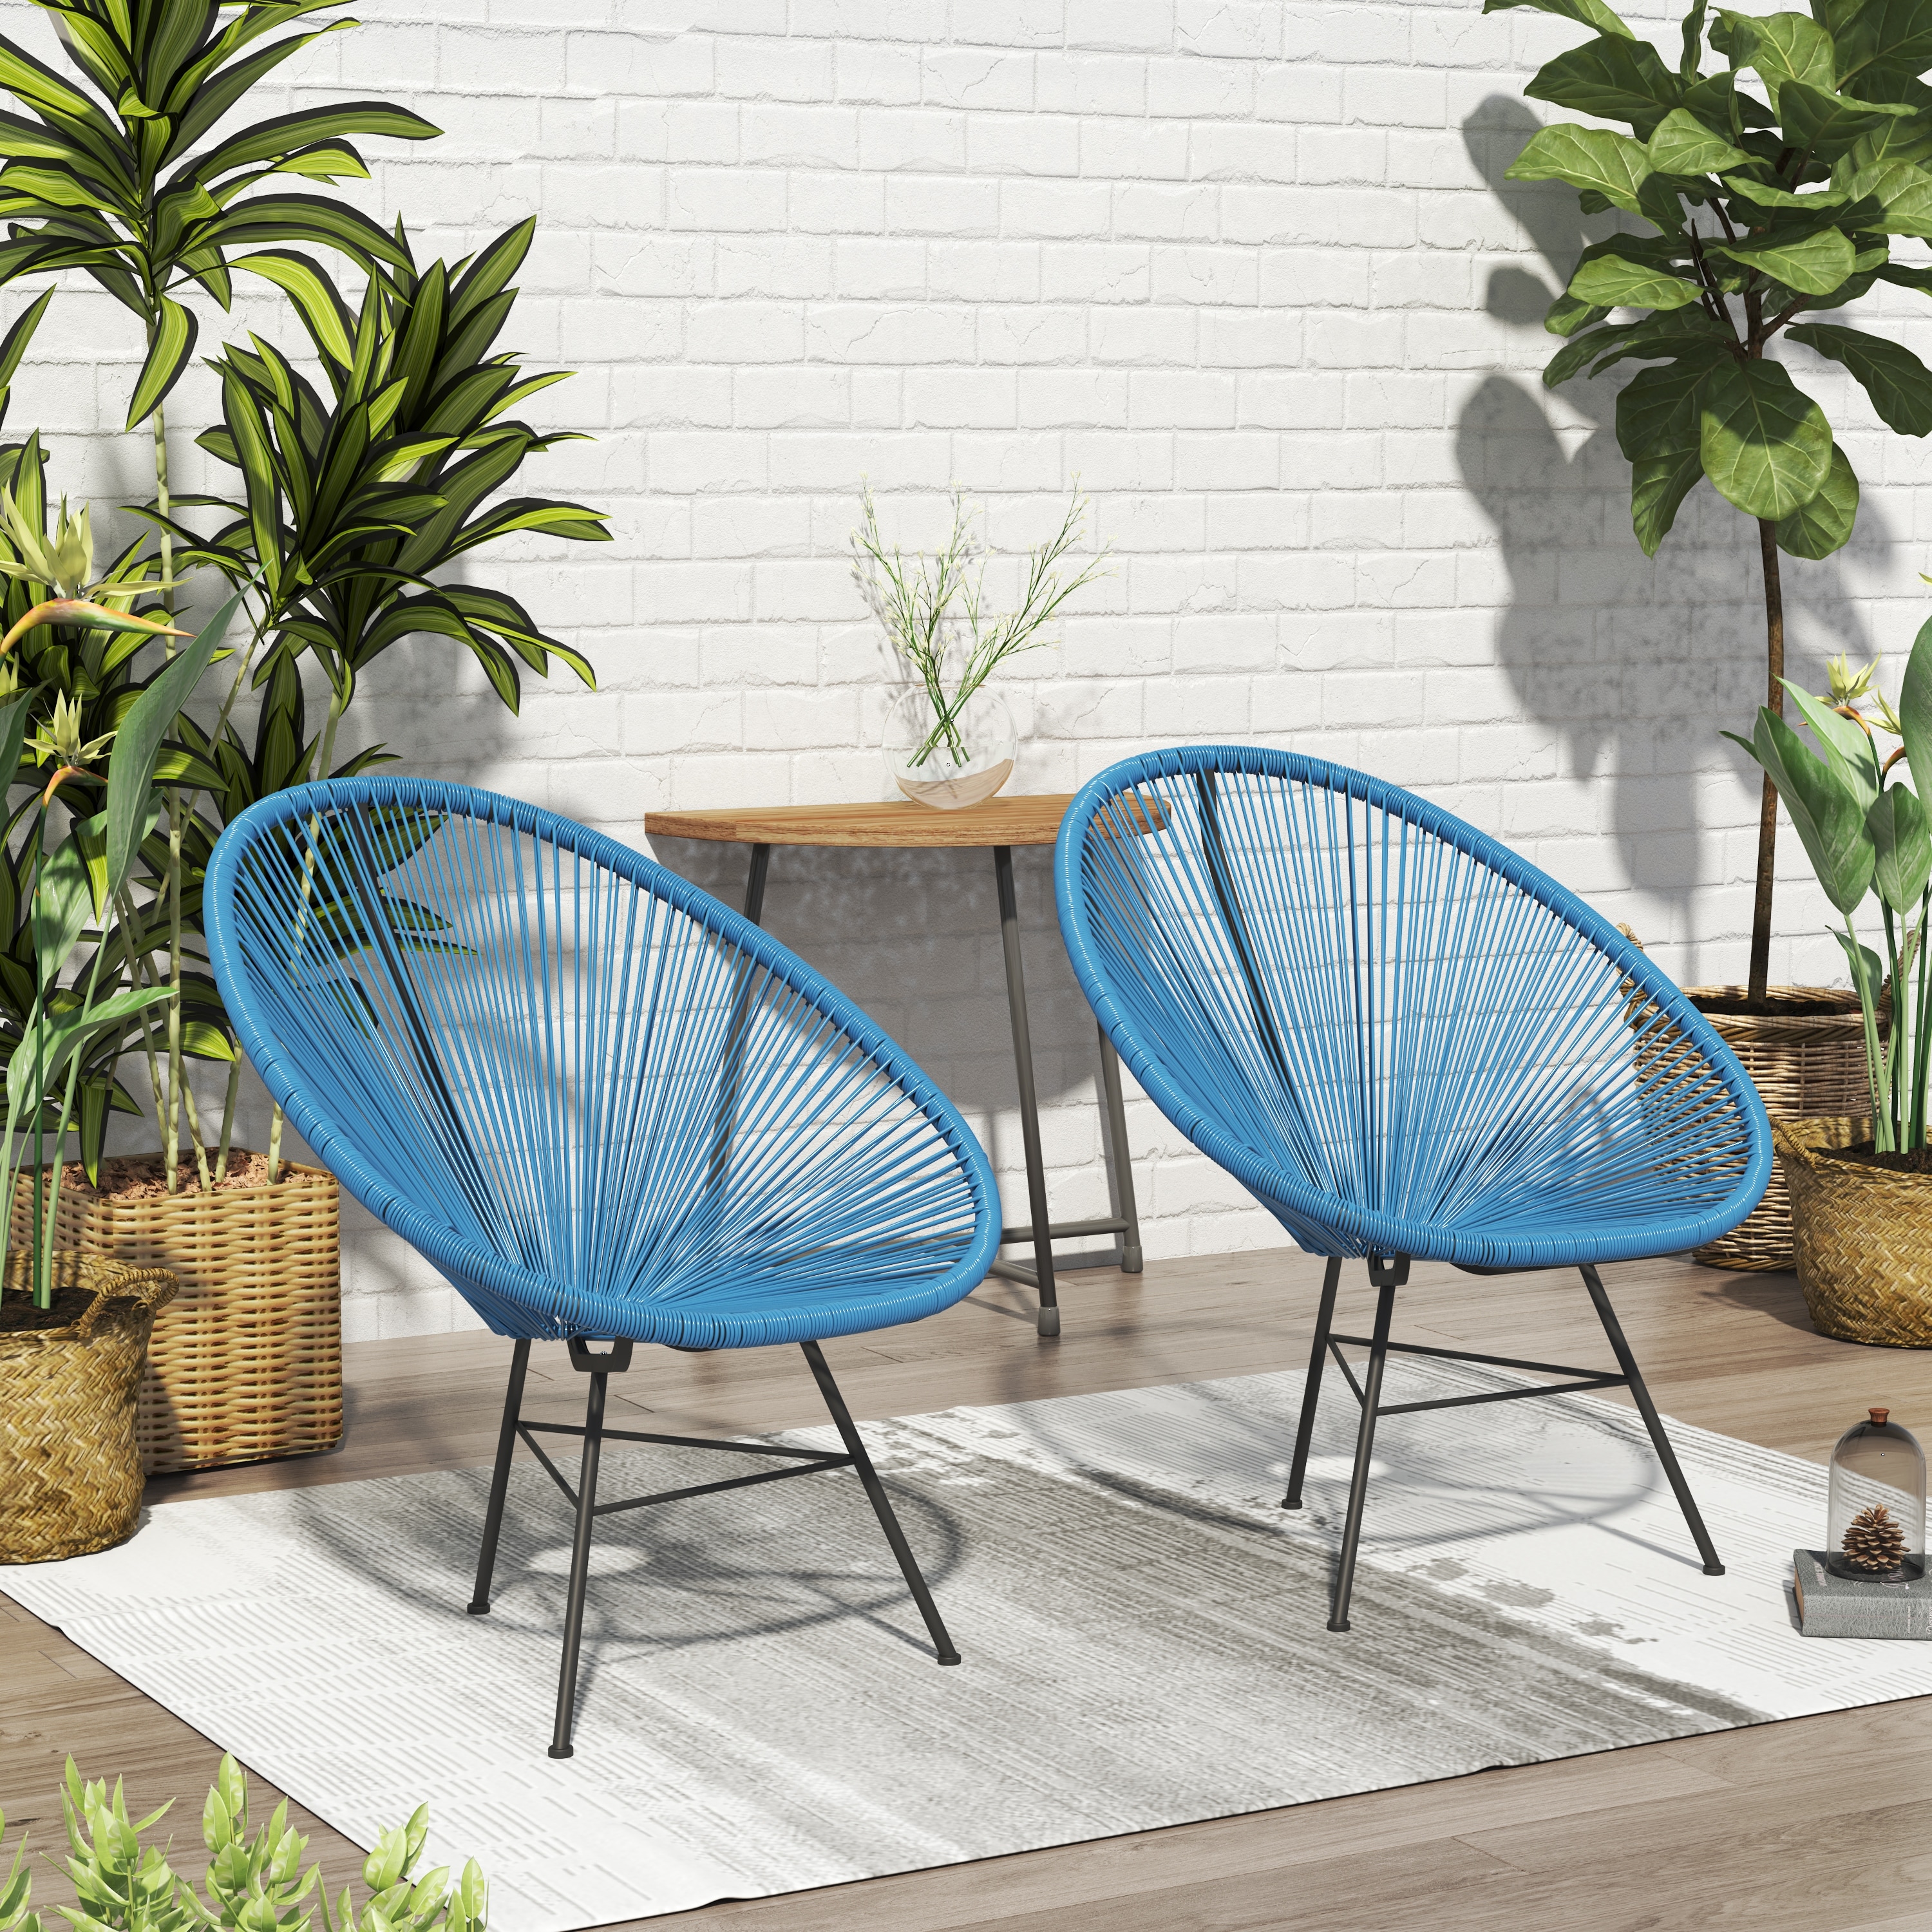 Sarcelles Acapulco Modern Wicker Chairs By Corvus (set Of 2)